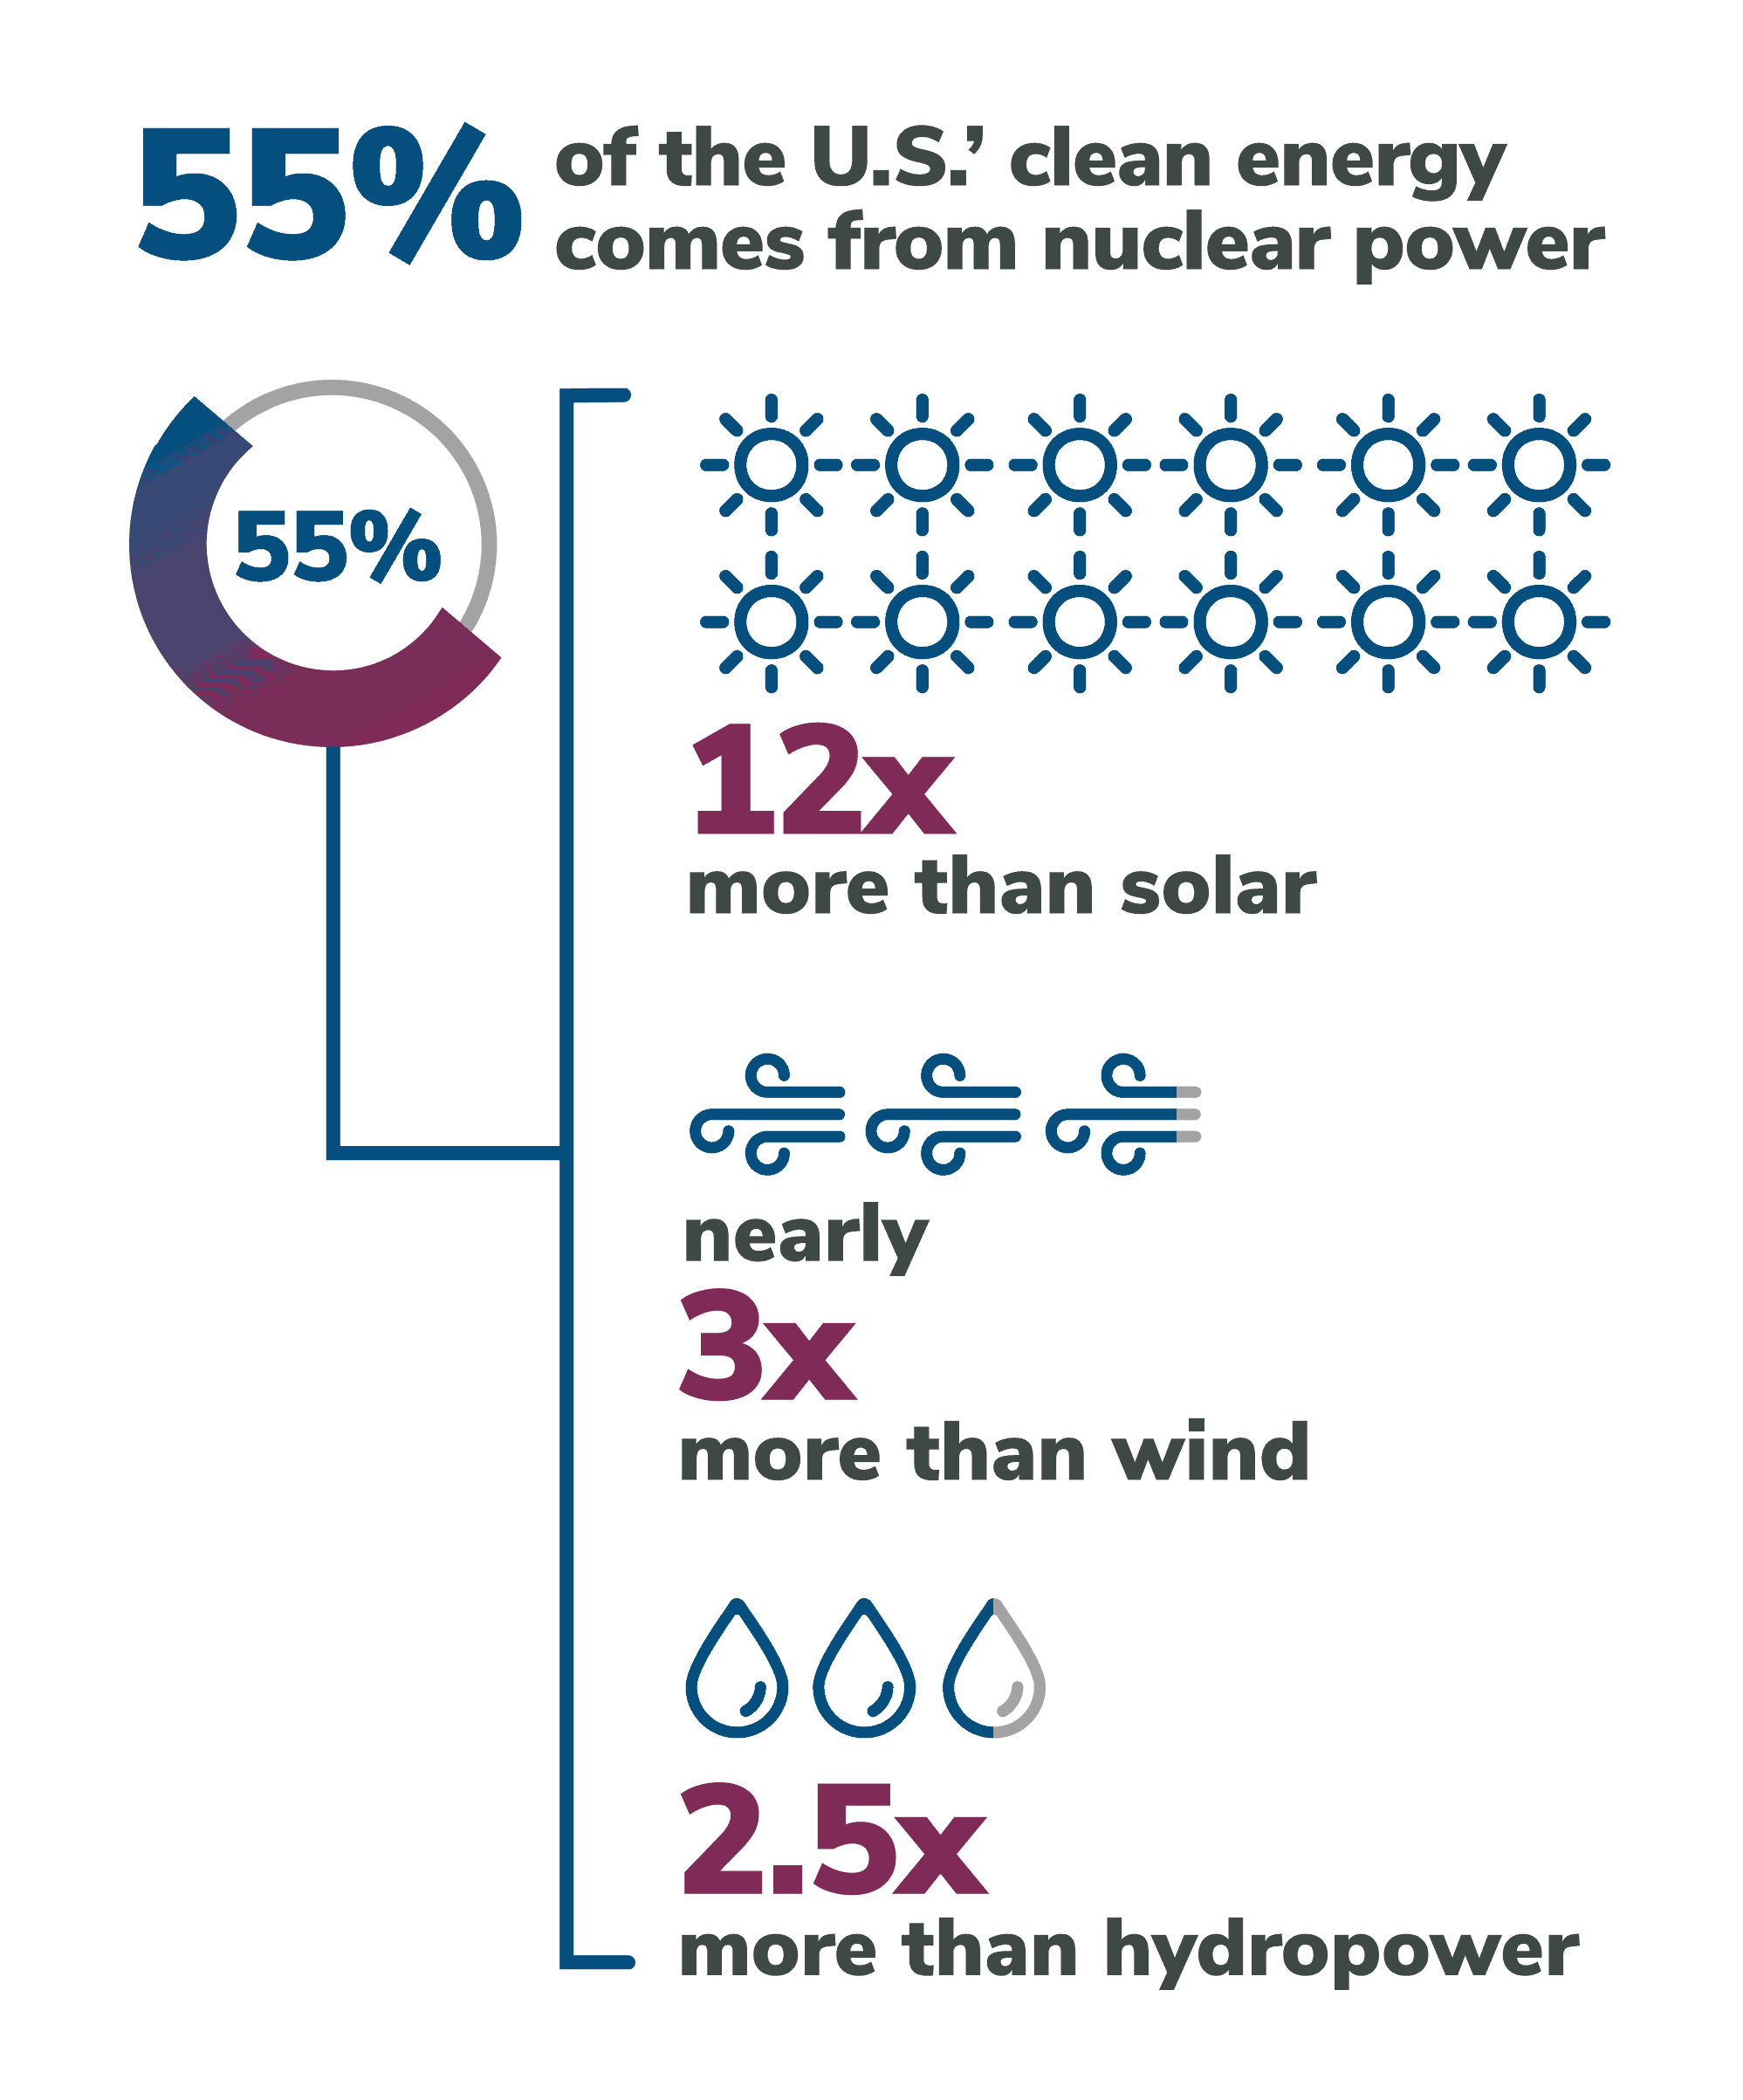 55% of the U.S.' clean energy comes from nuclear power. That's 12x more than solar, nearly 3x more than wind, and 2.5 times more than hydropower.